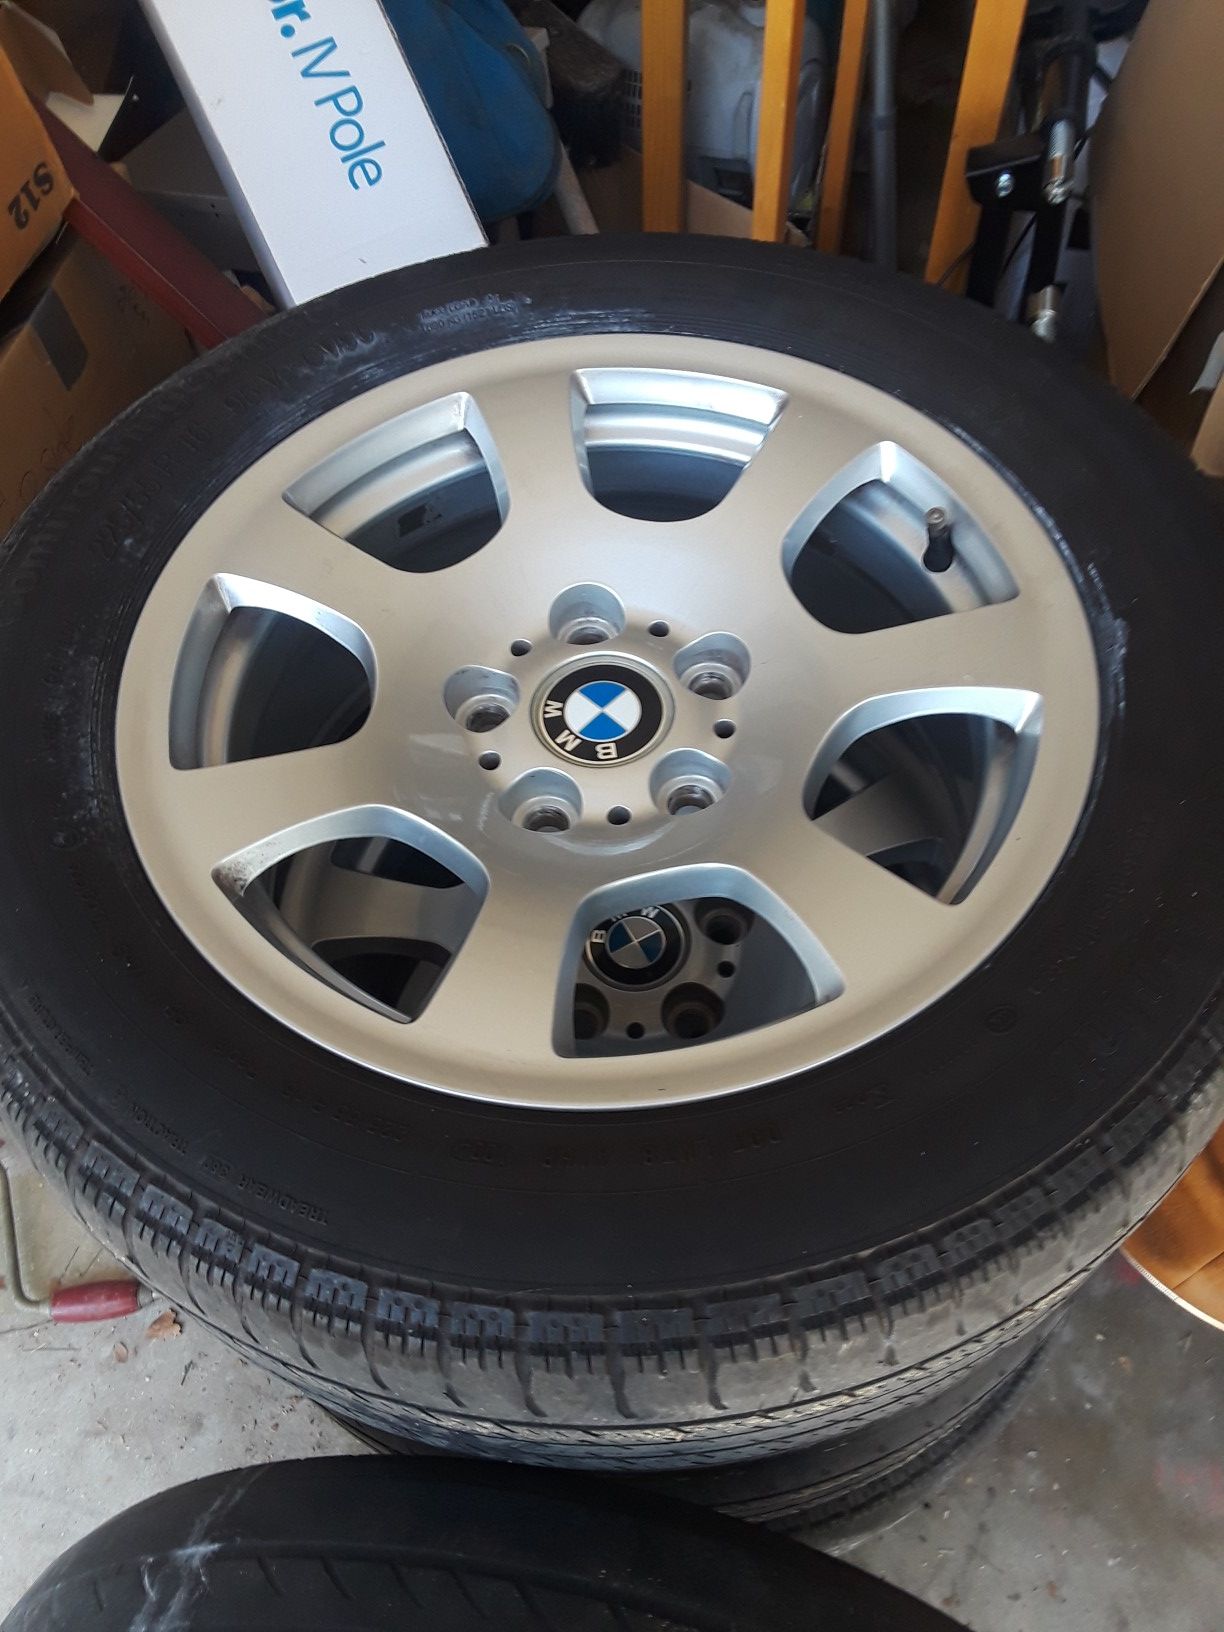 Set of 4 5 Series BMW rims and tires